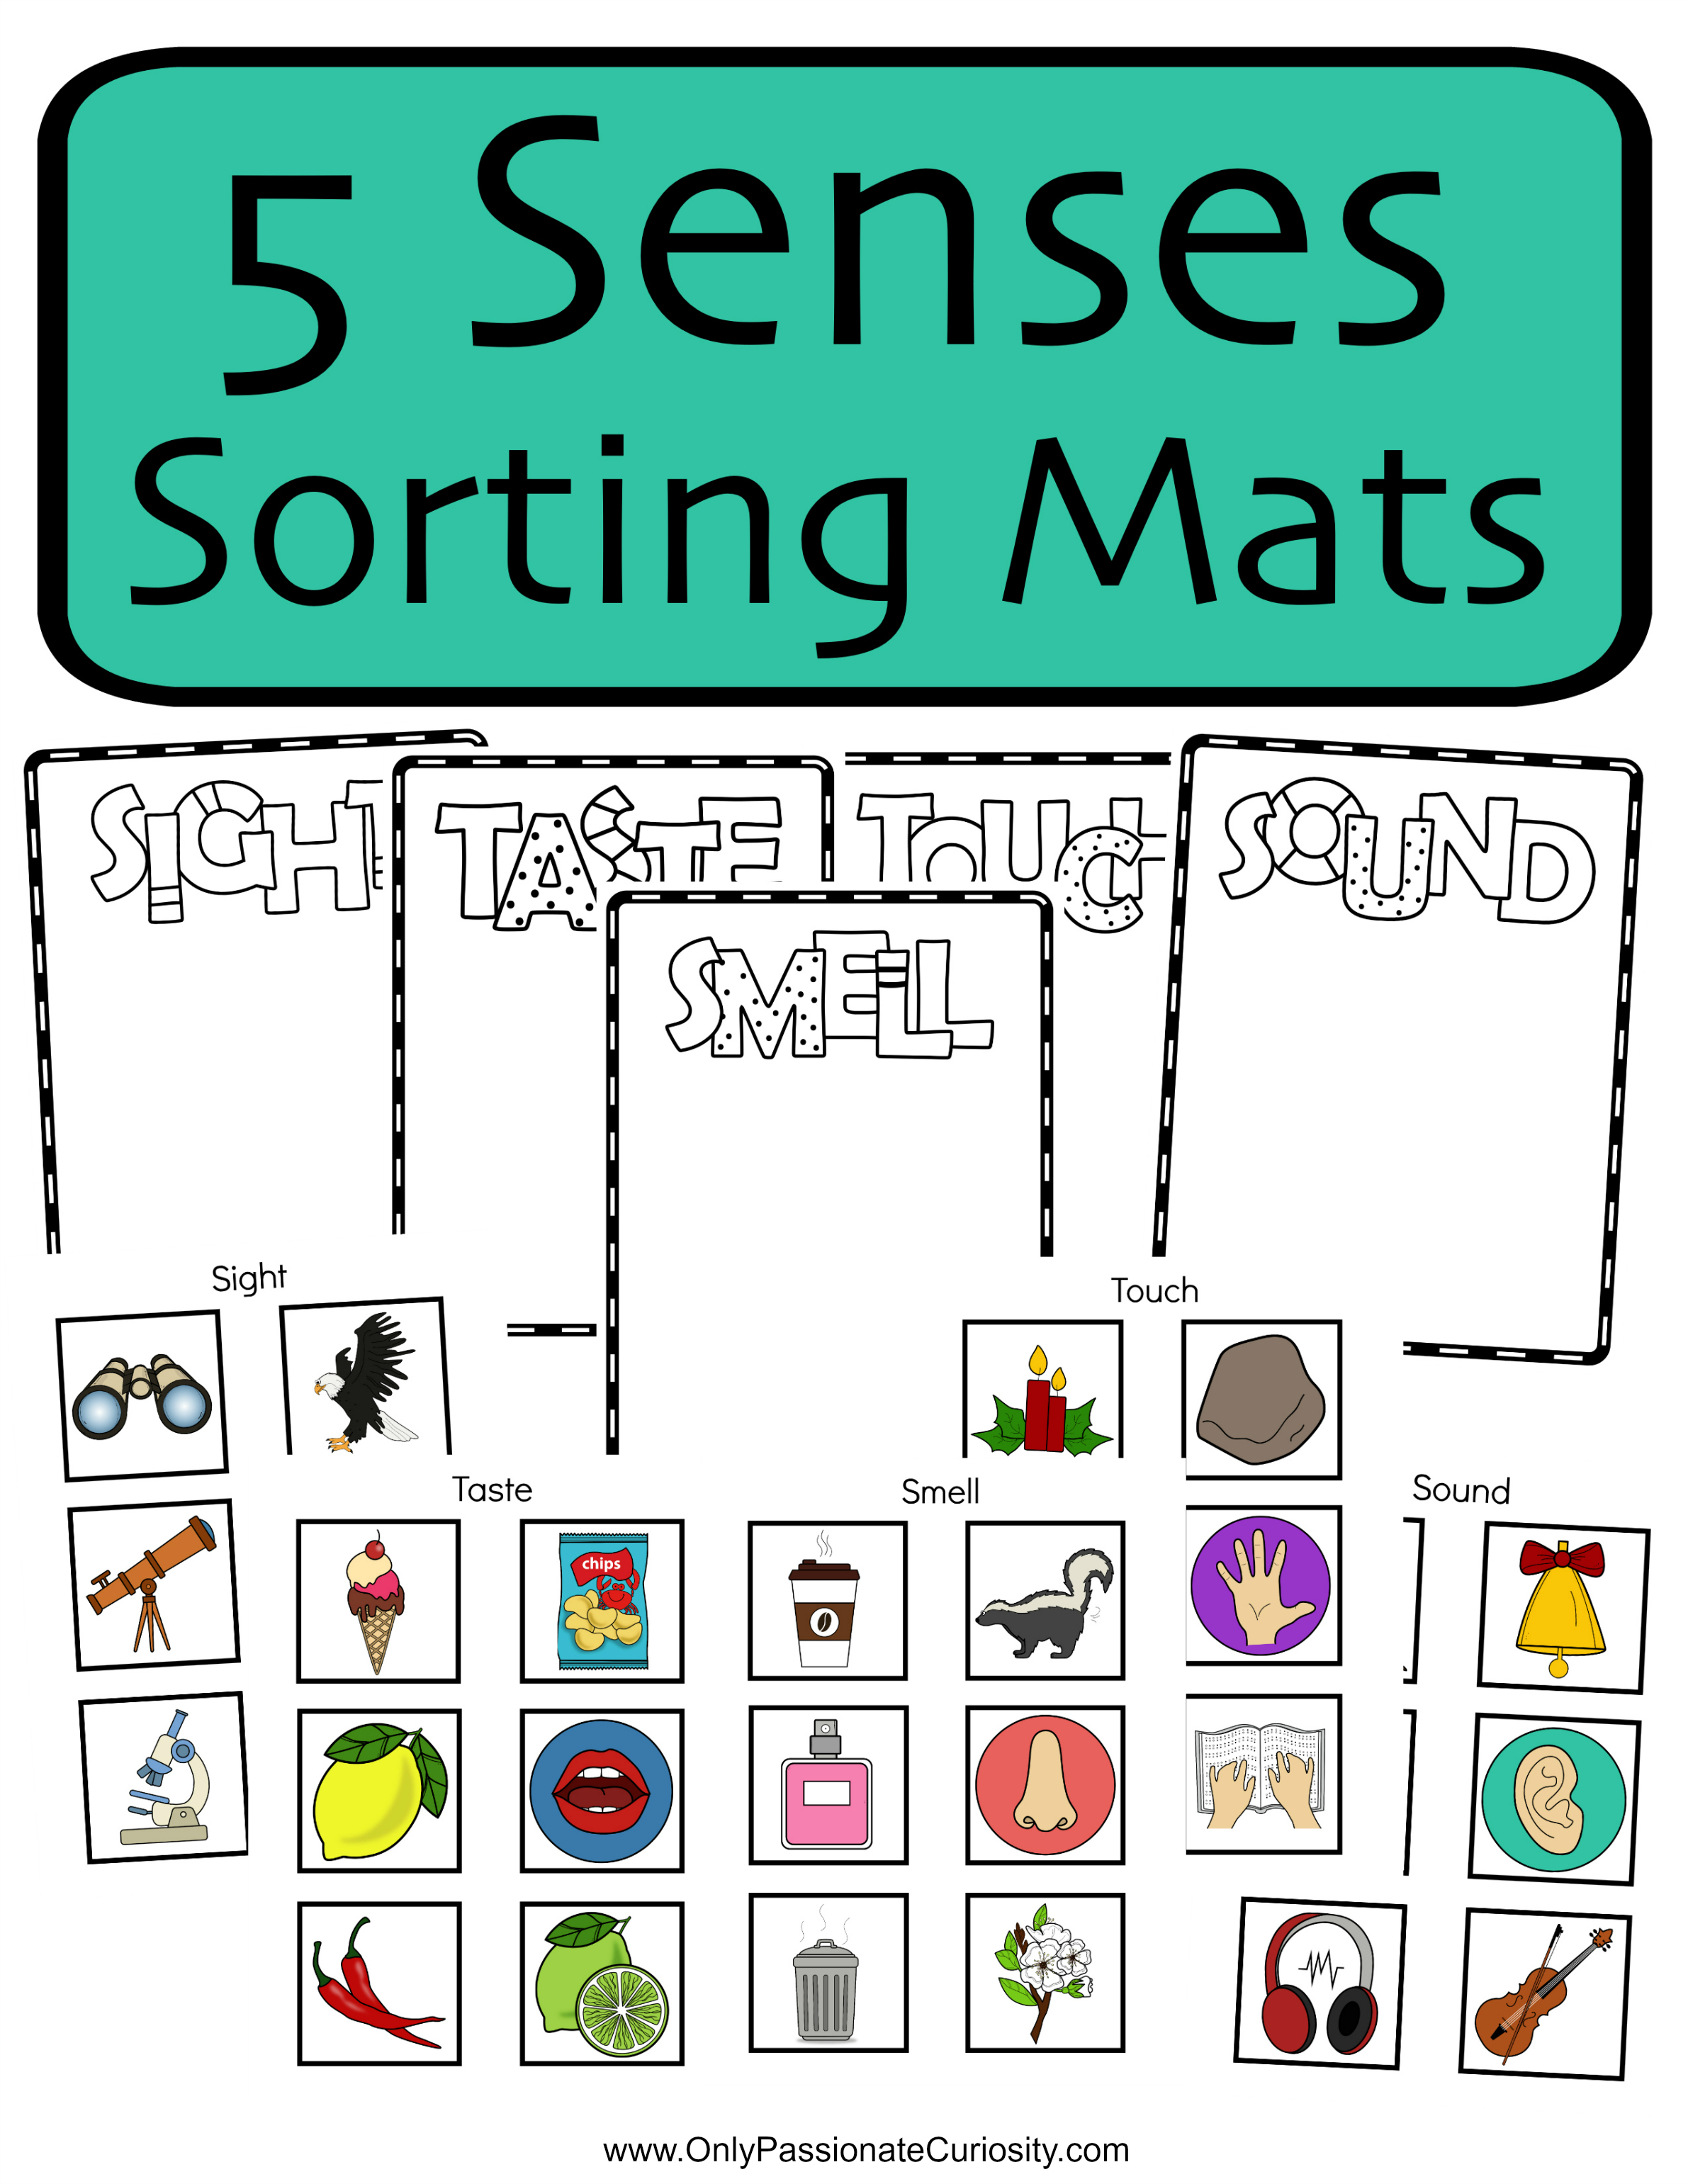 sorting mats worksheets the 5 senses only passionate